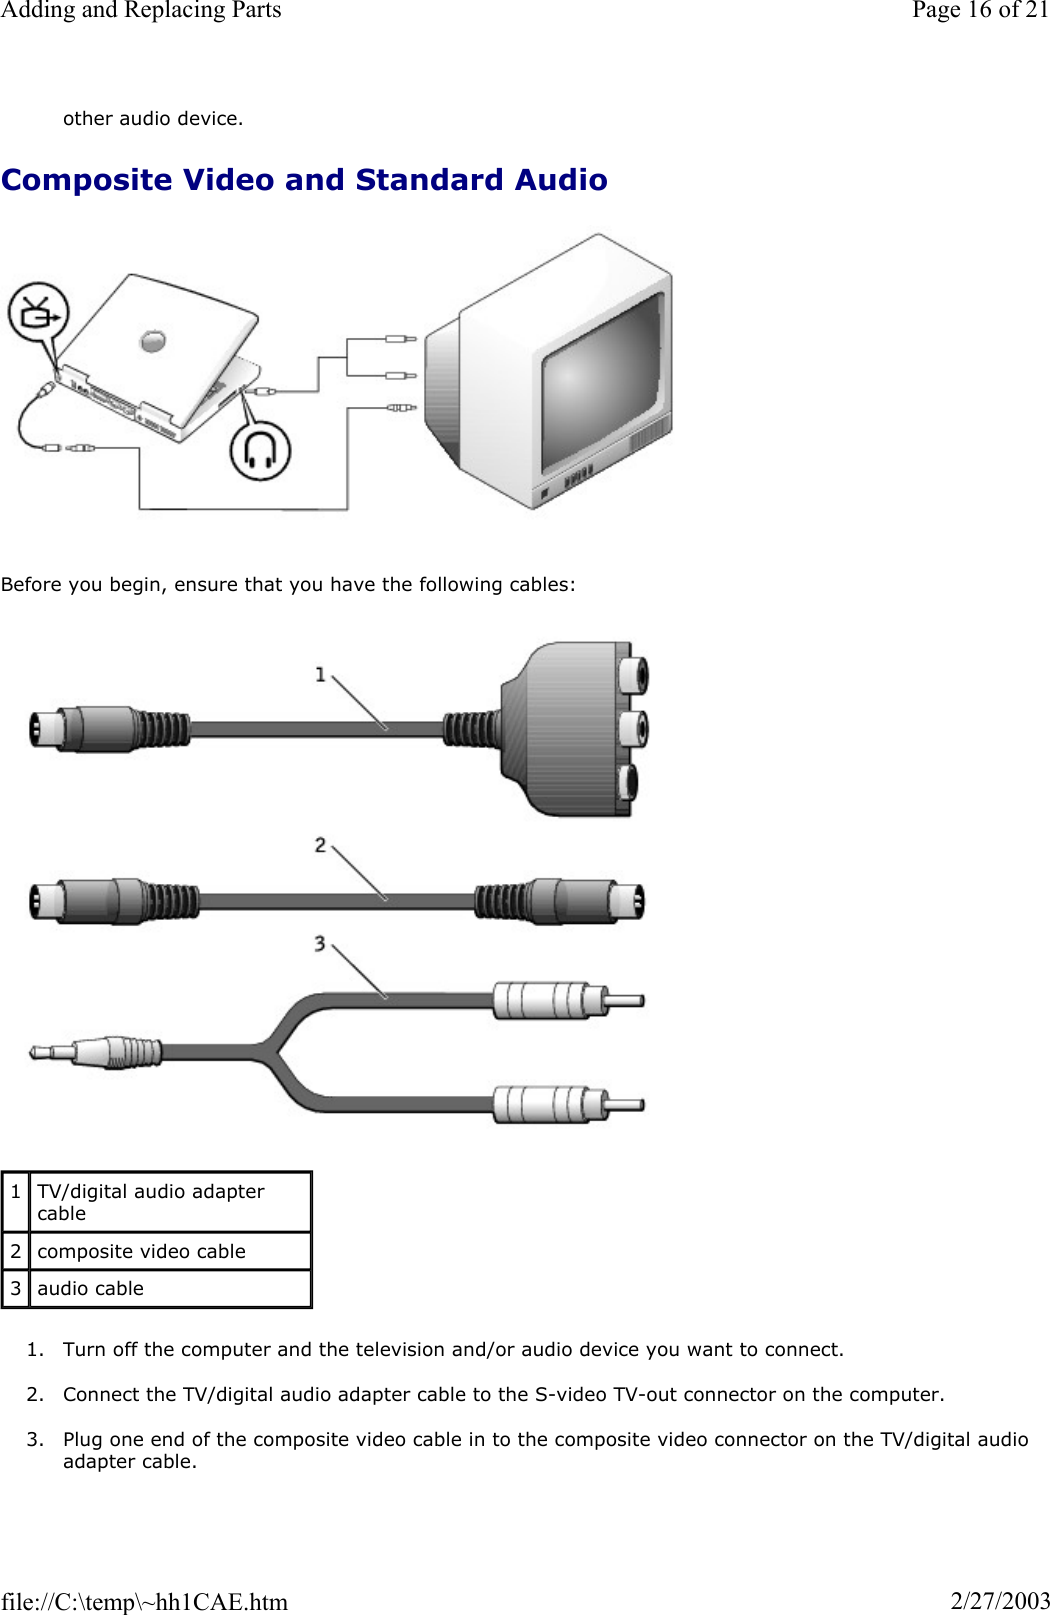 other audio device. Composite Video and Standard Audio Before you begin, ensure that you have the following cables: 1. Turn off the computer and the television and/or audio device you want to connect. 2. Connect the TV/digital audio adapter cable to the S-video TV-out connector on the computer. 3. Plug one end of the composite video cable in to the composite video connector on the TV/digital audio adapter cable. 1TV/digital audio adapter cable 2composite video cable 3audio cable Page 16 of 21Adding and Replacing Parts2/27/2003file://C:\temp\~hh1CAE.htm